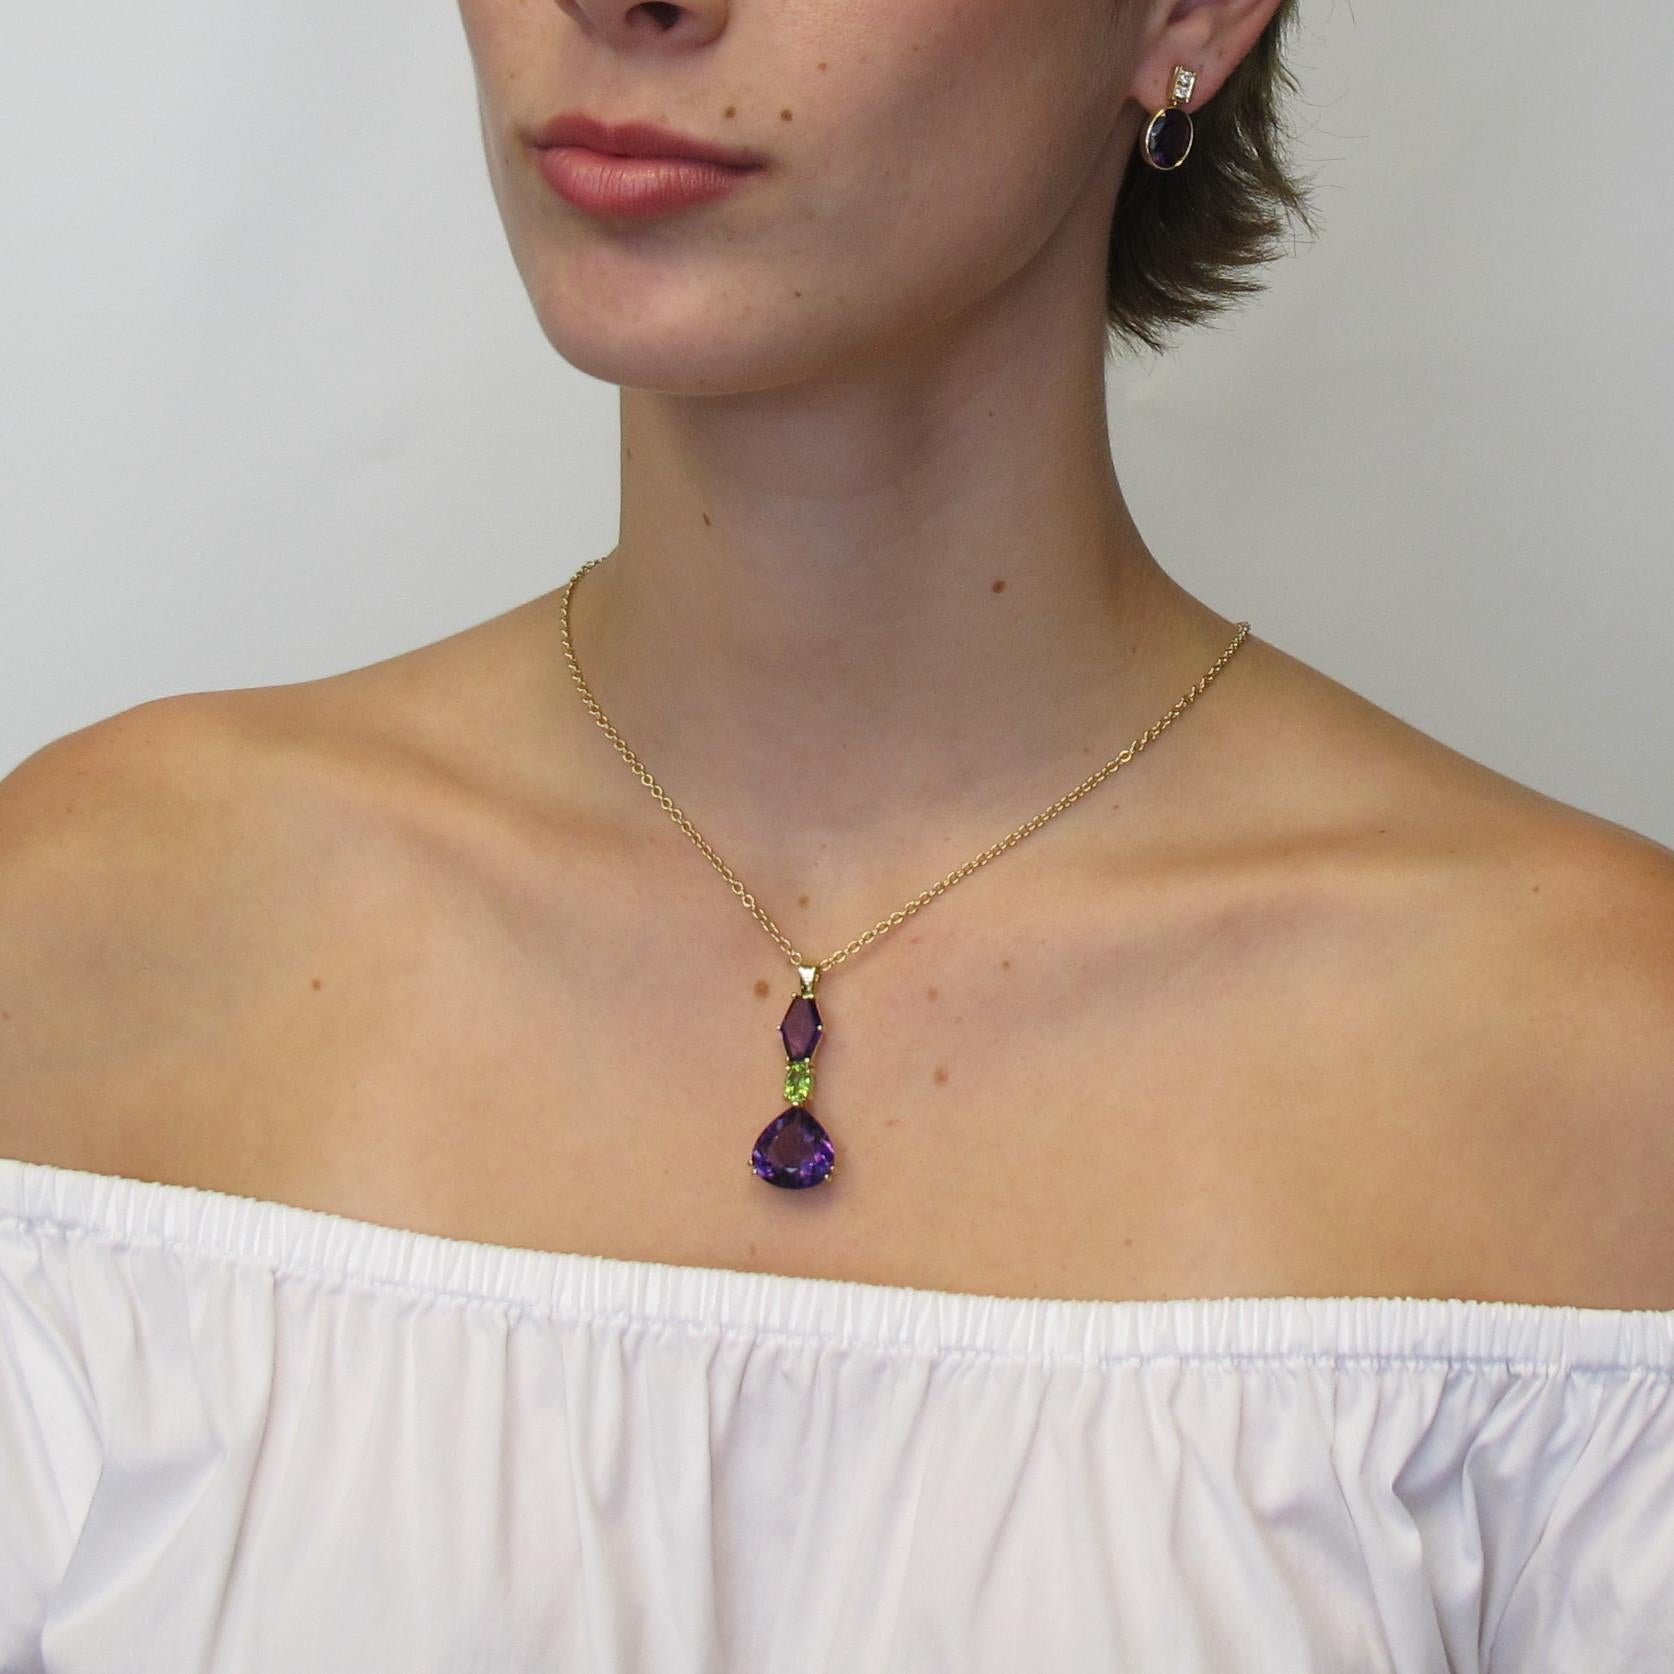  10 Carat Amethyst Drop Necklace with Peridot in 18k Yellow Gold For Sale 2